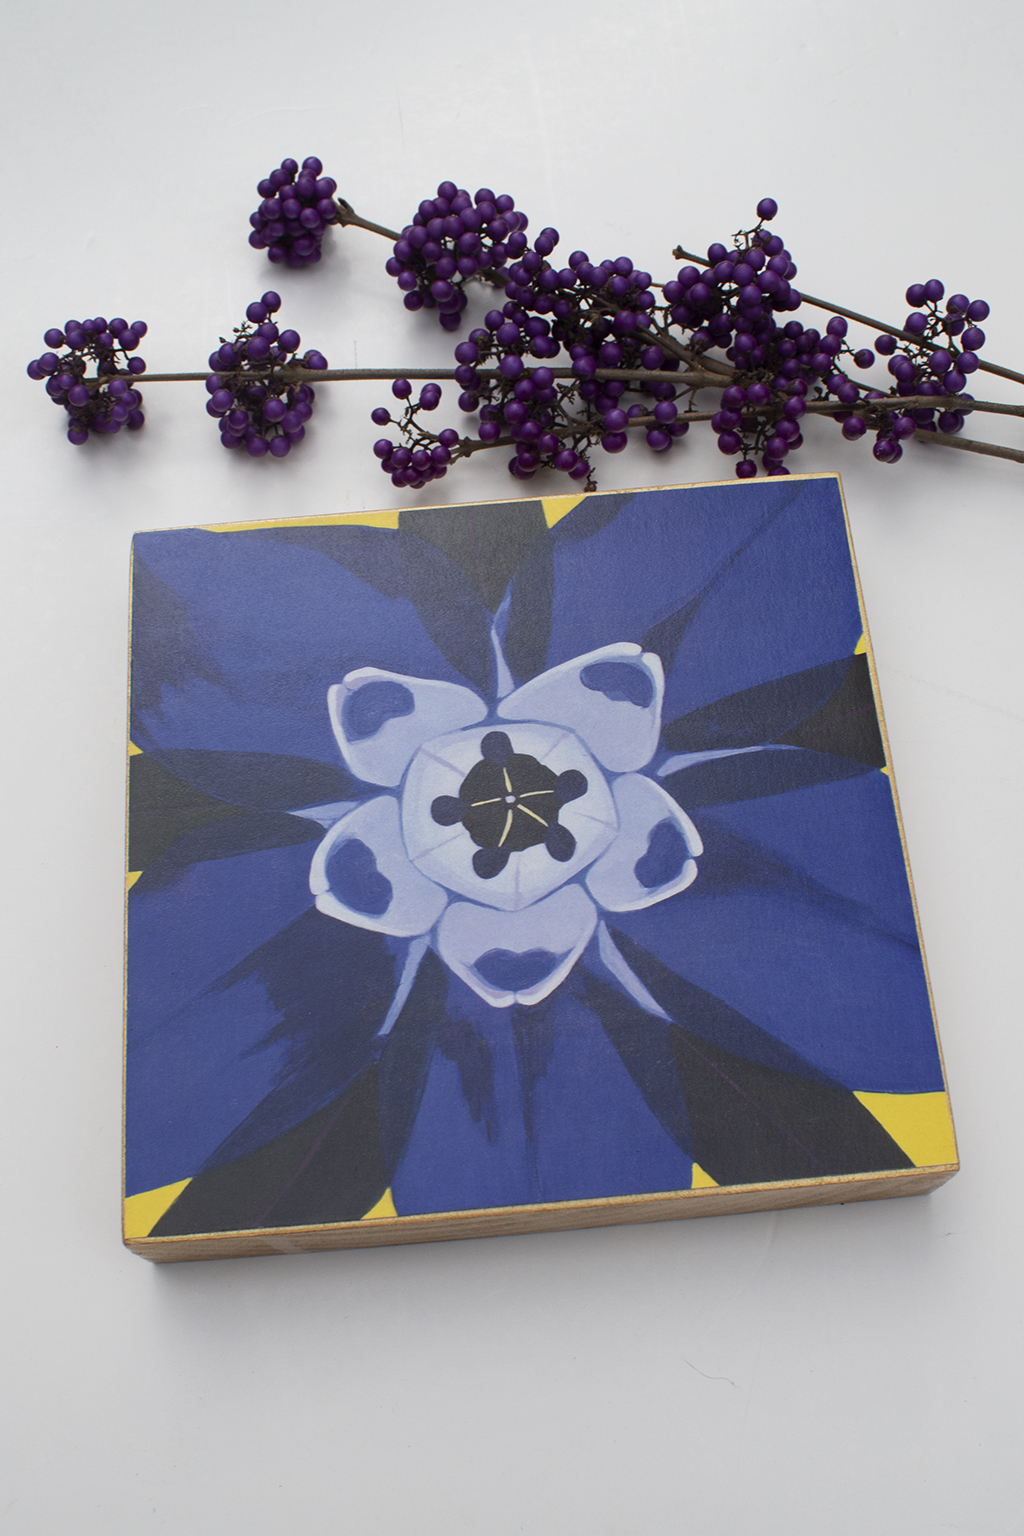 “Borago Officinale” on Gold Maple Wood